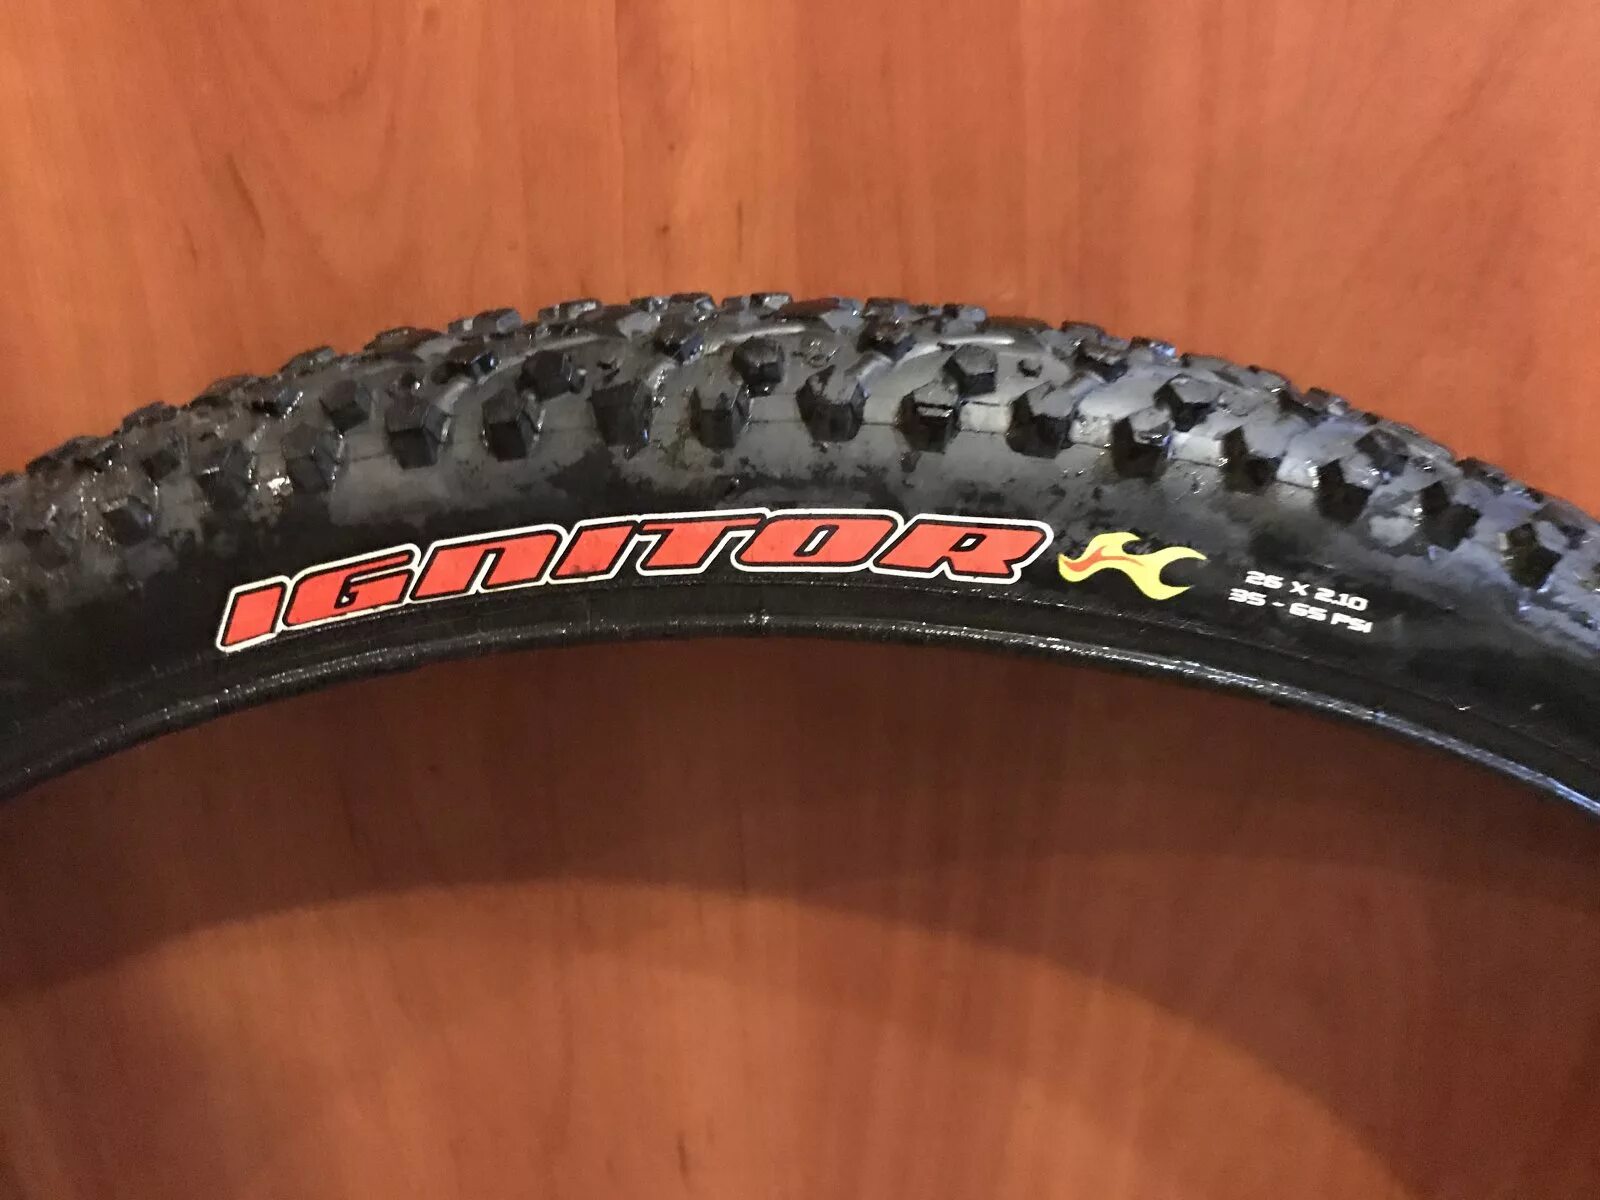 26 x 25 2x 7 13. Maxxis Ignitor 26. Maxxis Ignitor exception Series 26x2.1. Maxxis Ignitor k forum. IA-2901 26x2,1.